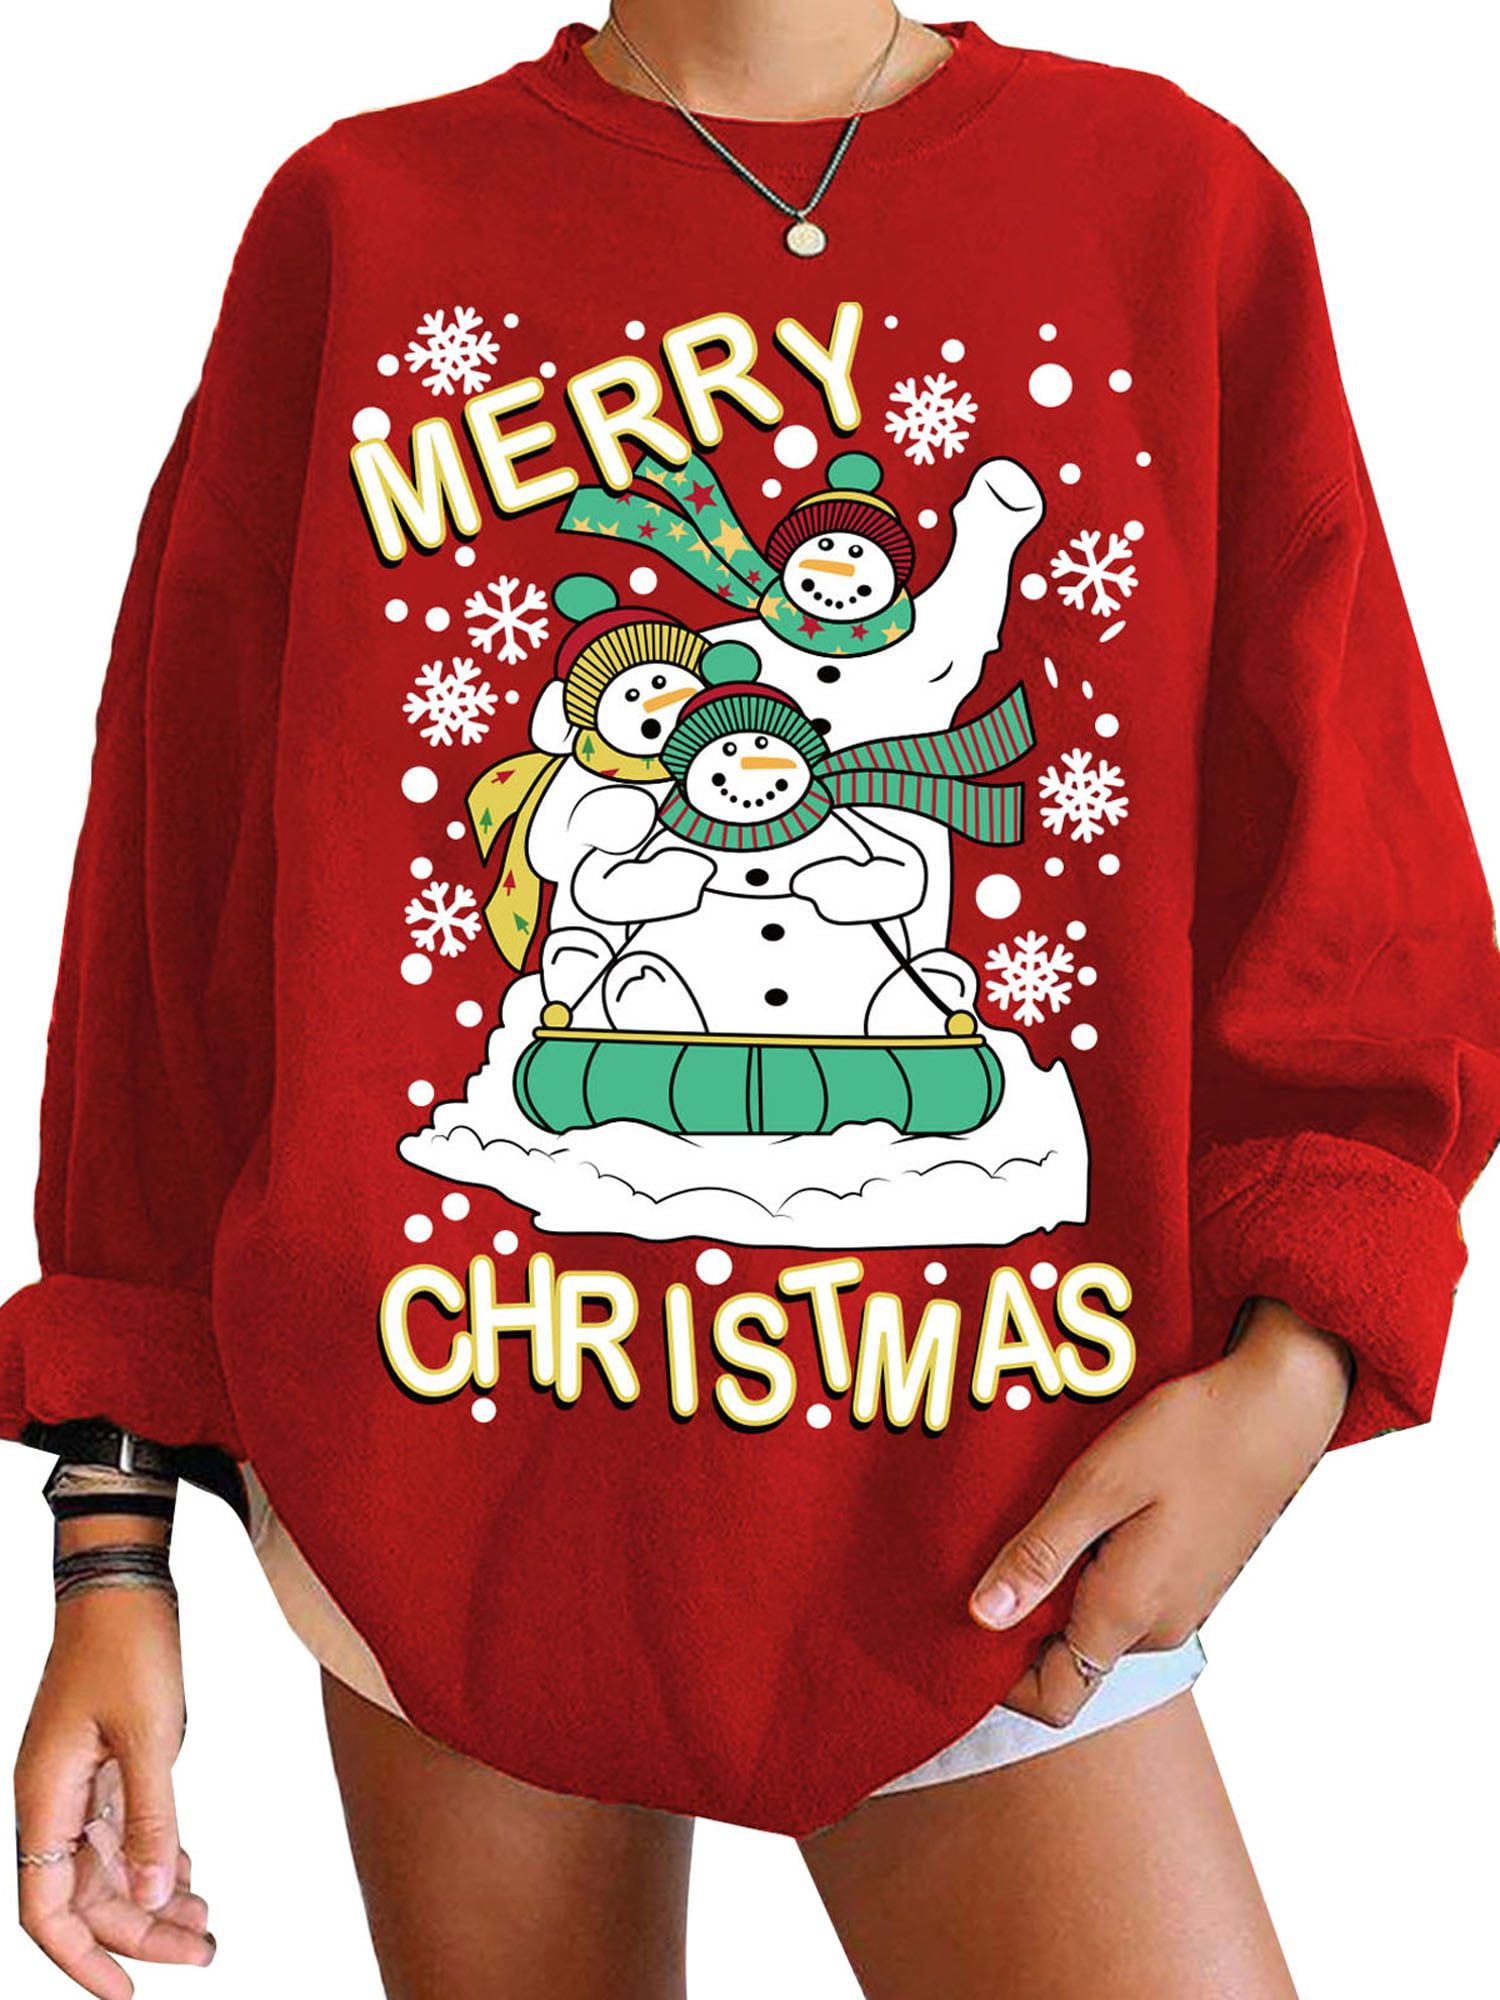 Women Ugly Christmas Sweatshirt Long Sleeve Crewneck Pullover Tops Vintage Funny Graphic T Shirt Blouse